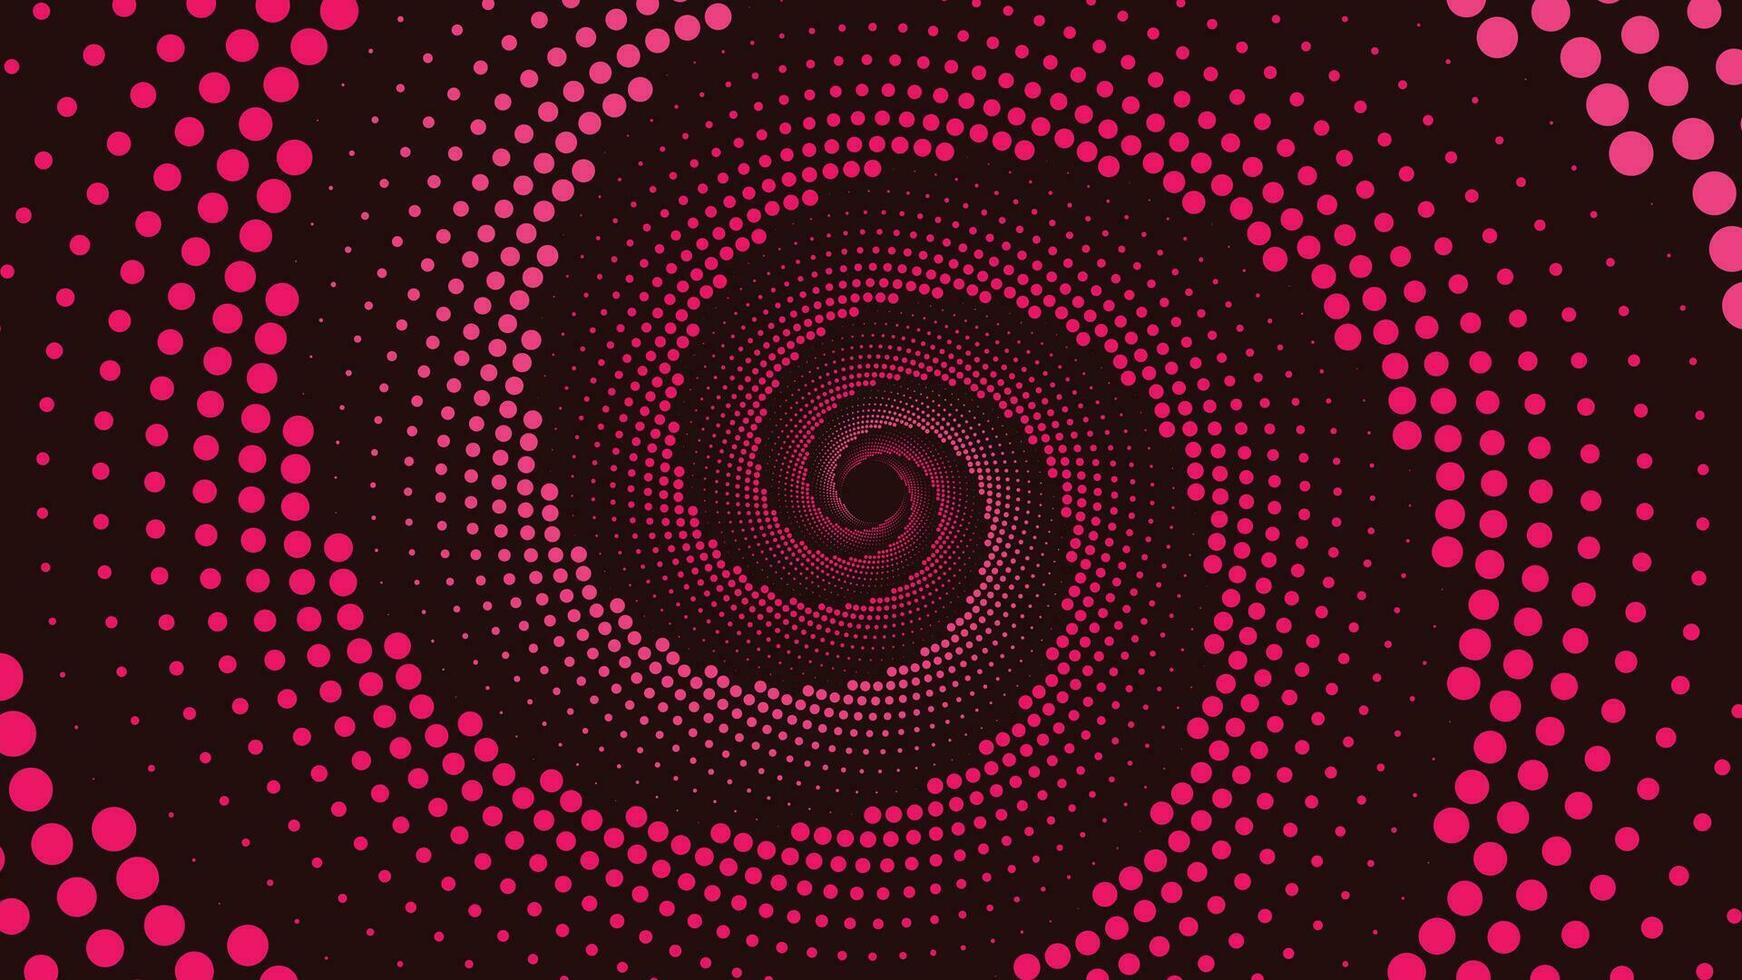 Abstract spiral background. This creative round spiral vortex style background can be used as banner or website background. vector